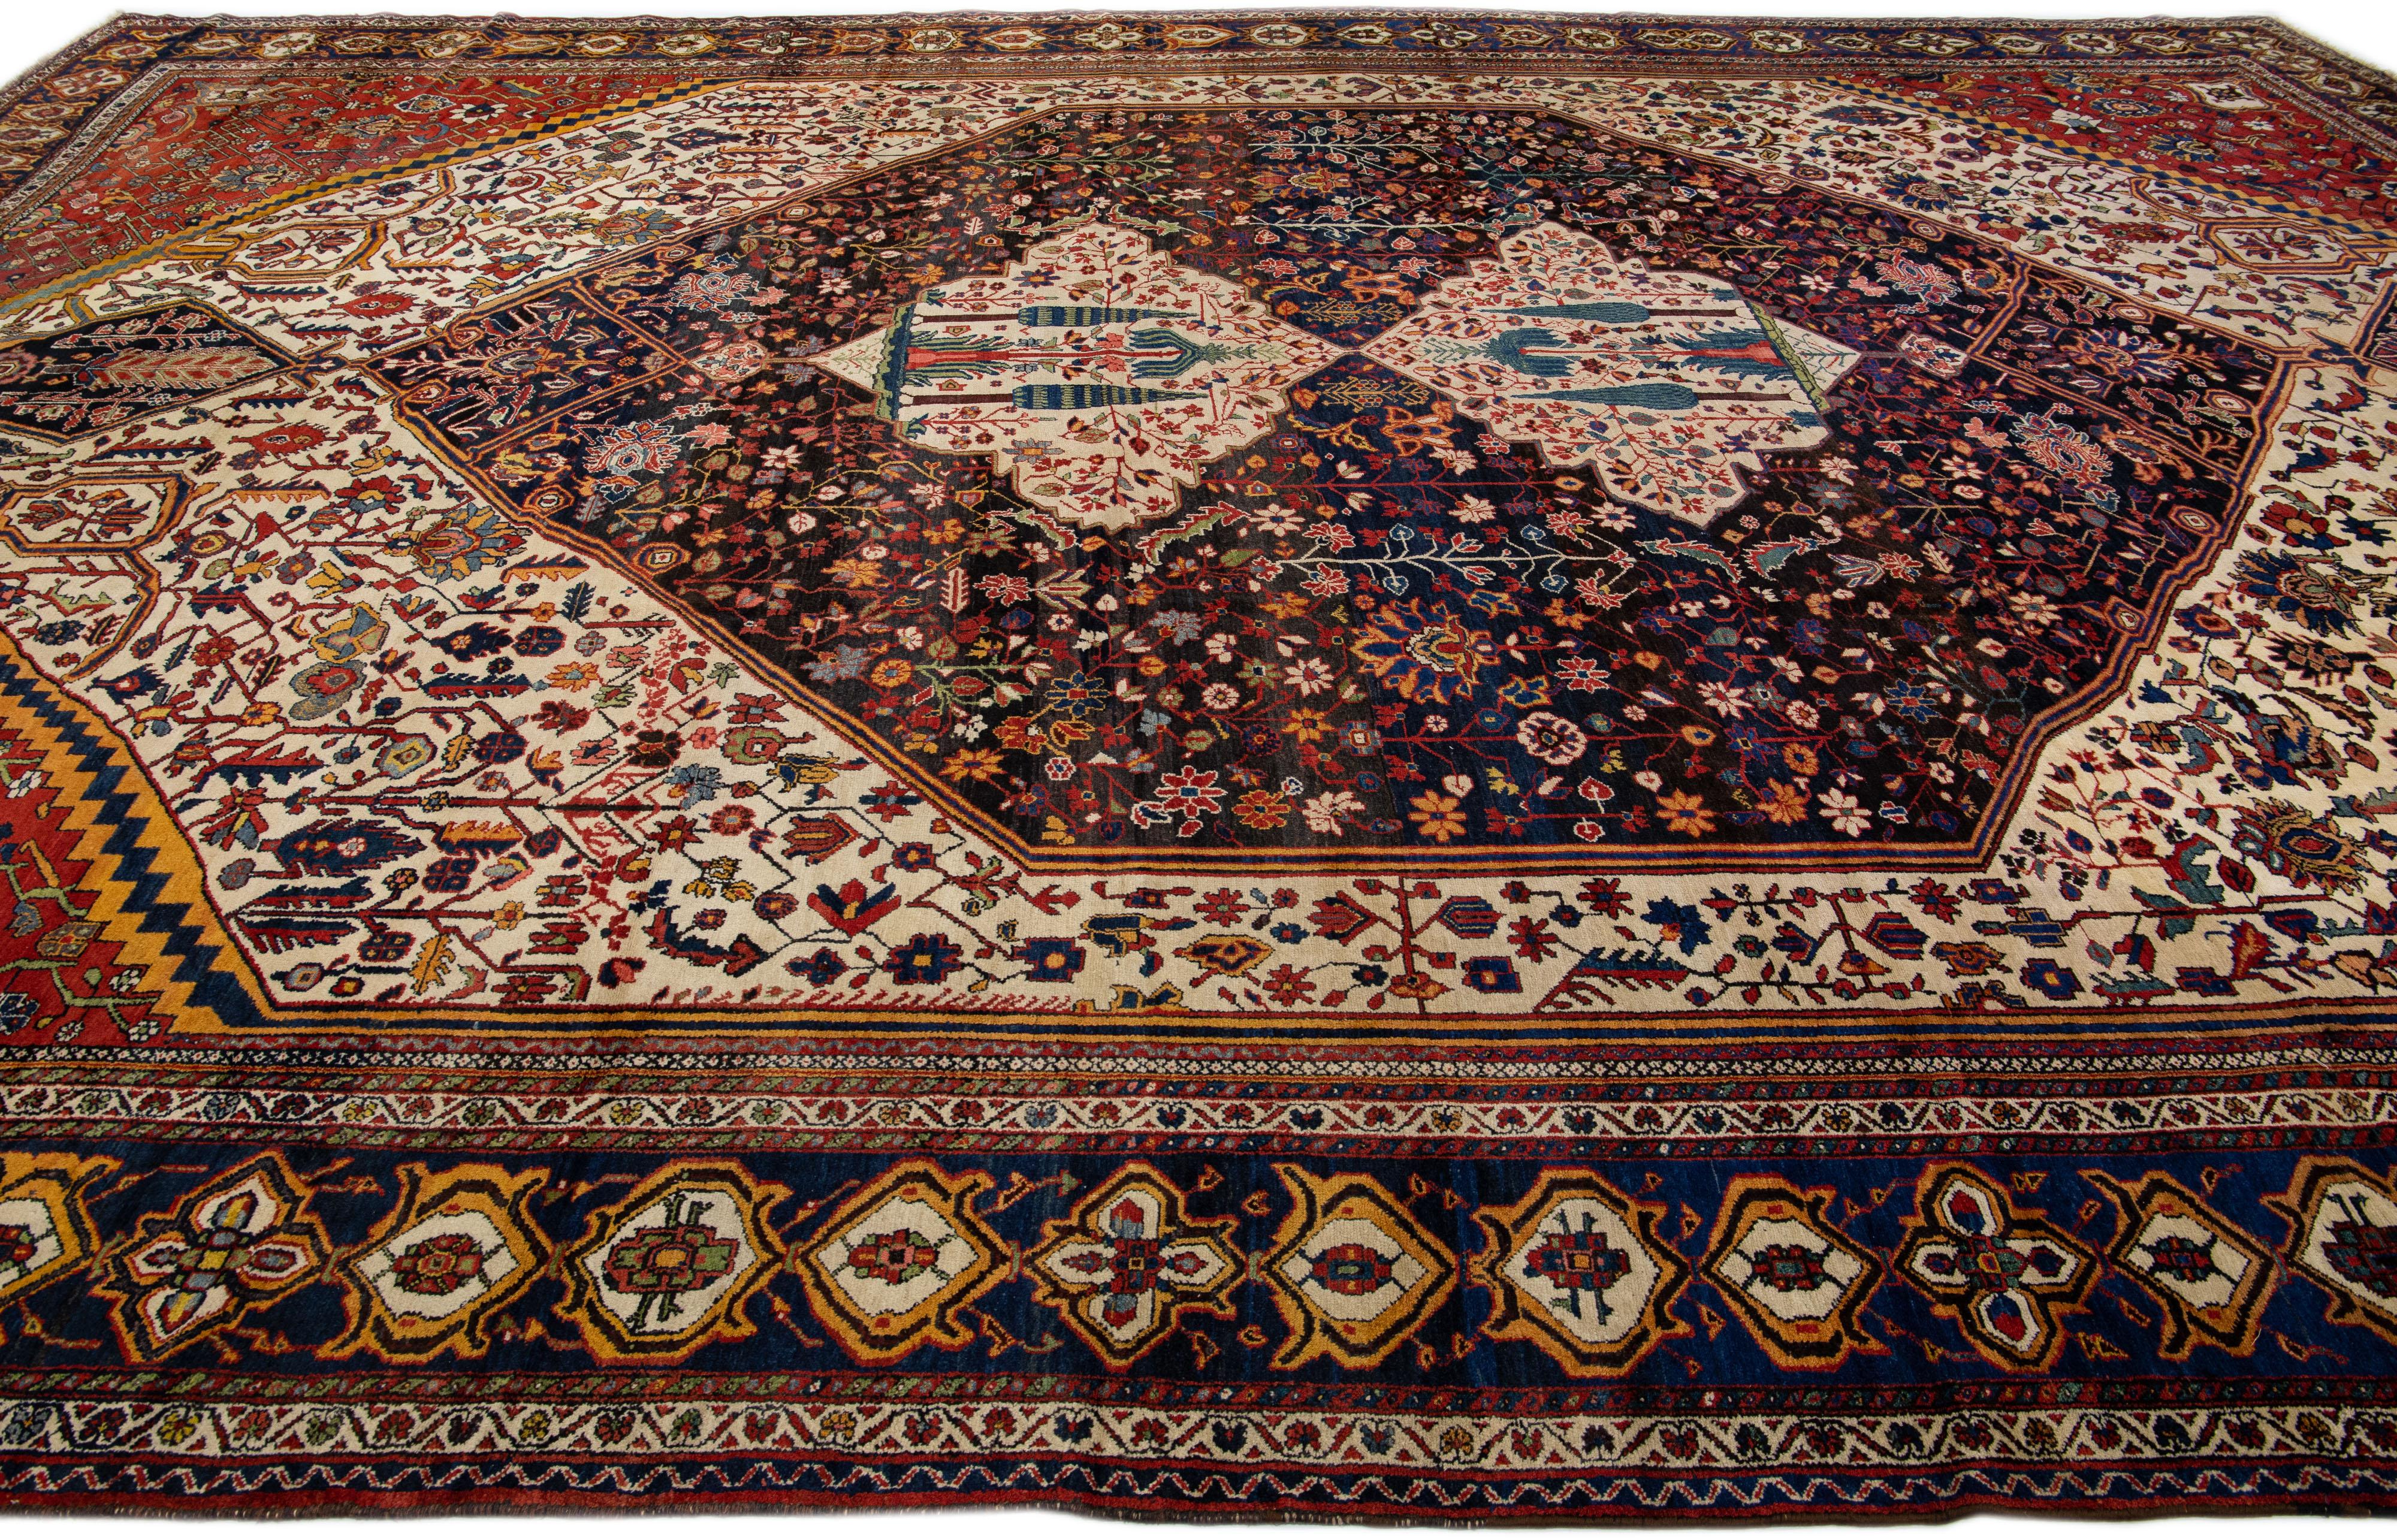 Antique Bakhtiari Persian Handmade Red and Blue Floral Oversize Wool Rug In Excellent Condition For Sale In Norwalk, CT